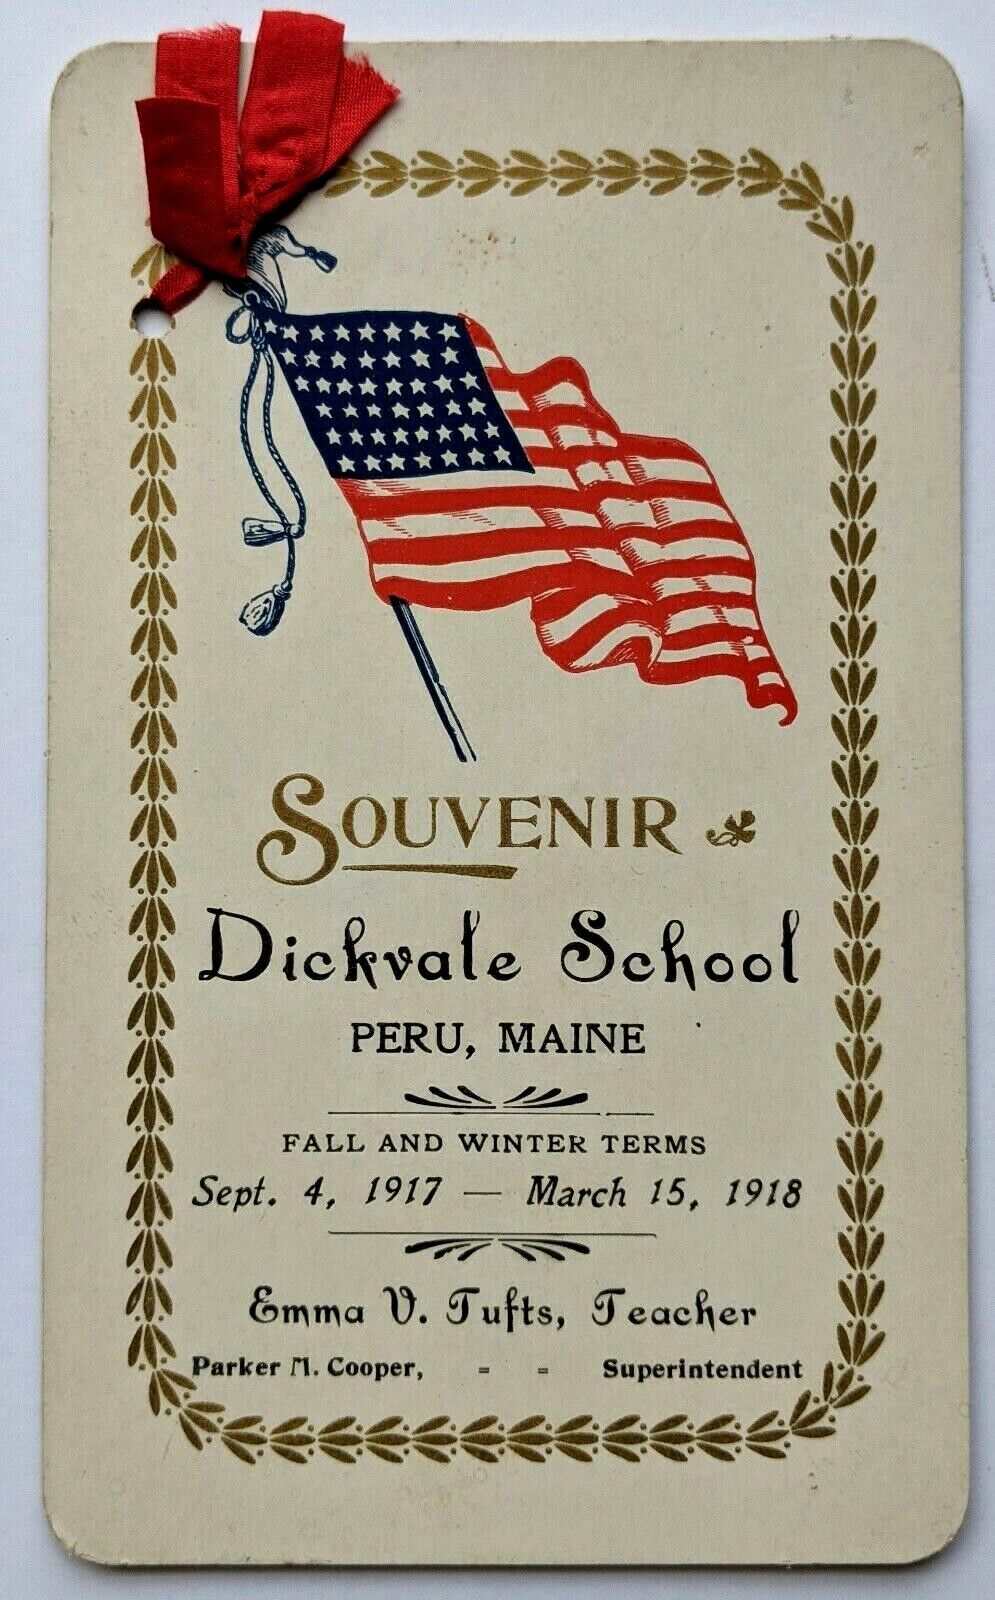 1917-18 Peru Maine ME Dickvale School Class Roster American Flag Pamphlet Oxford